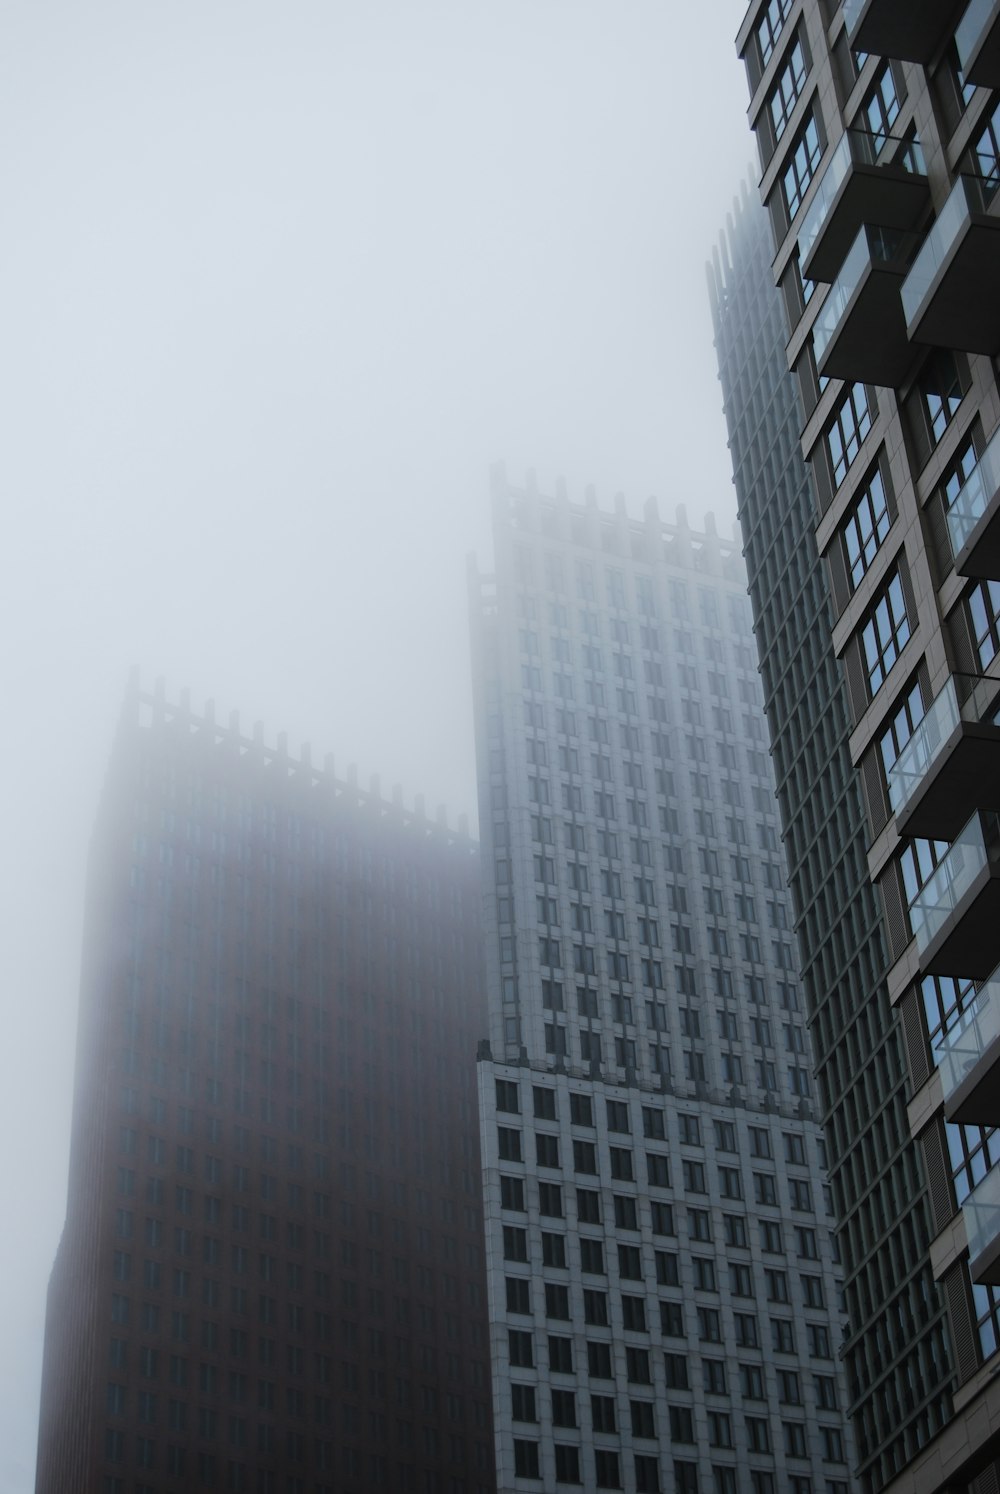 city with high-rise buildings during foggy season